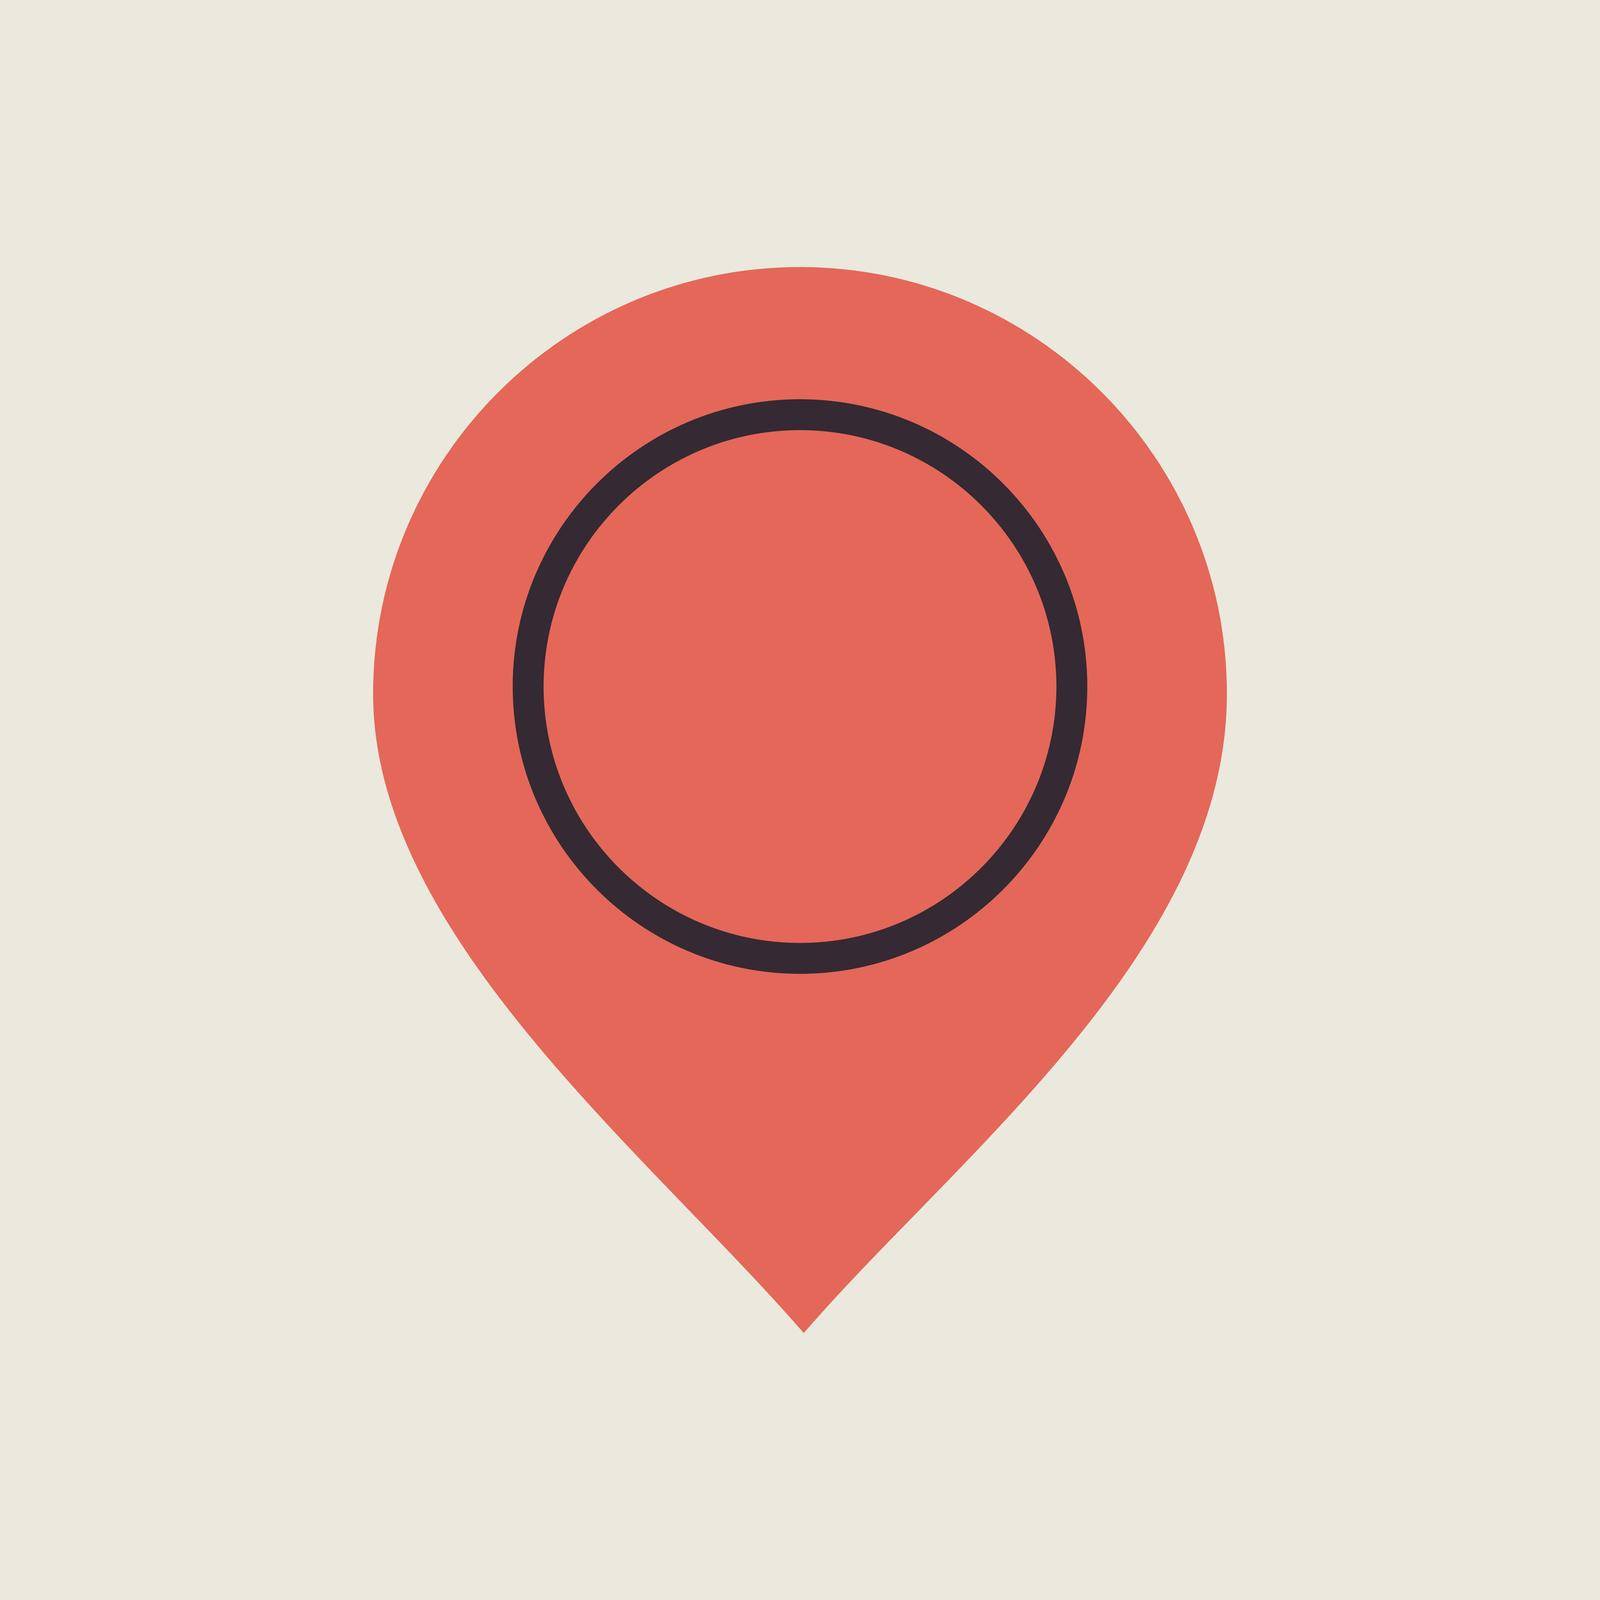 Pin map icon. Map pointer. Map markers by nosik